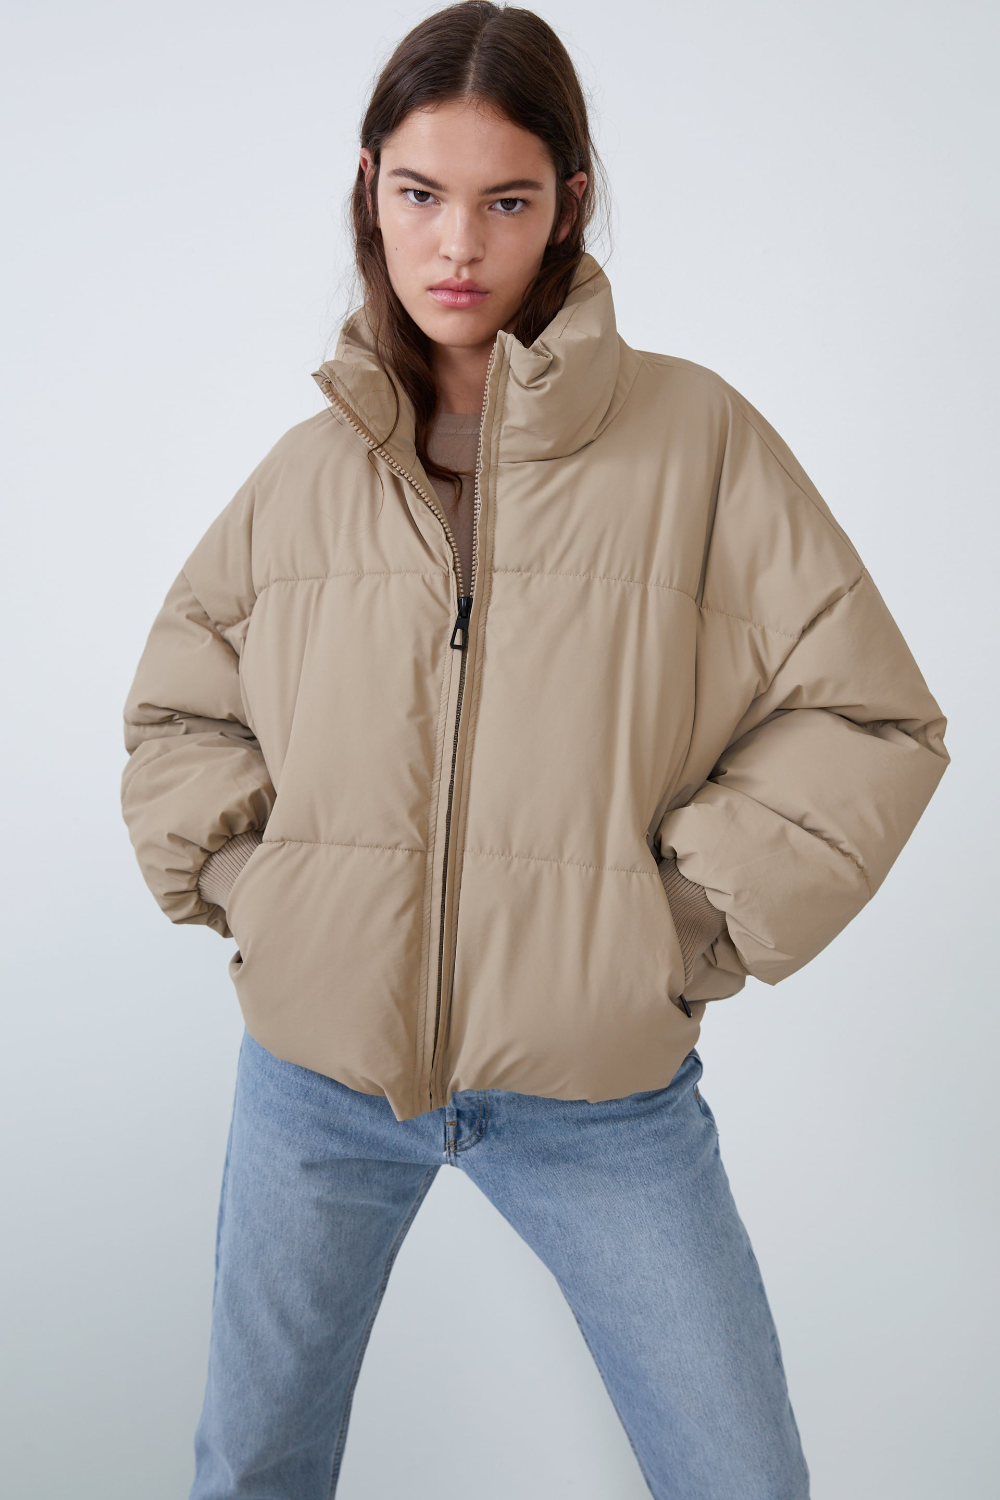 Jackets for women